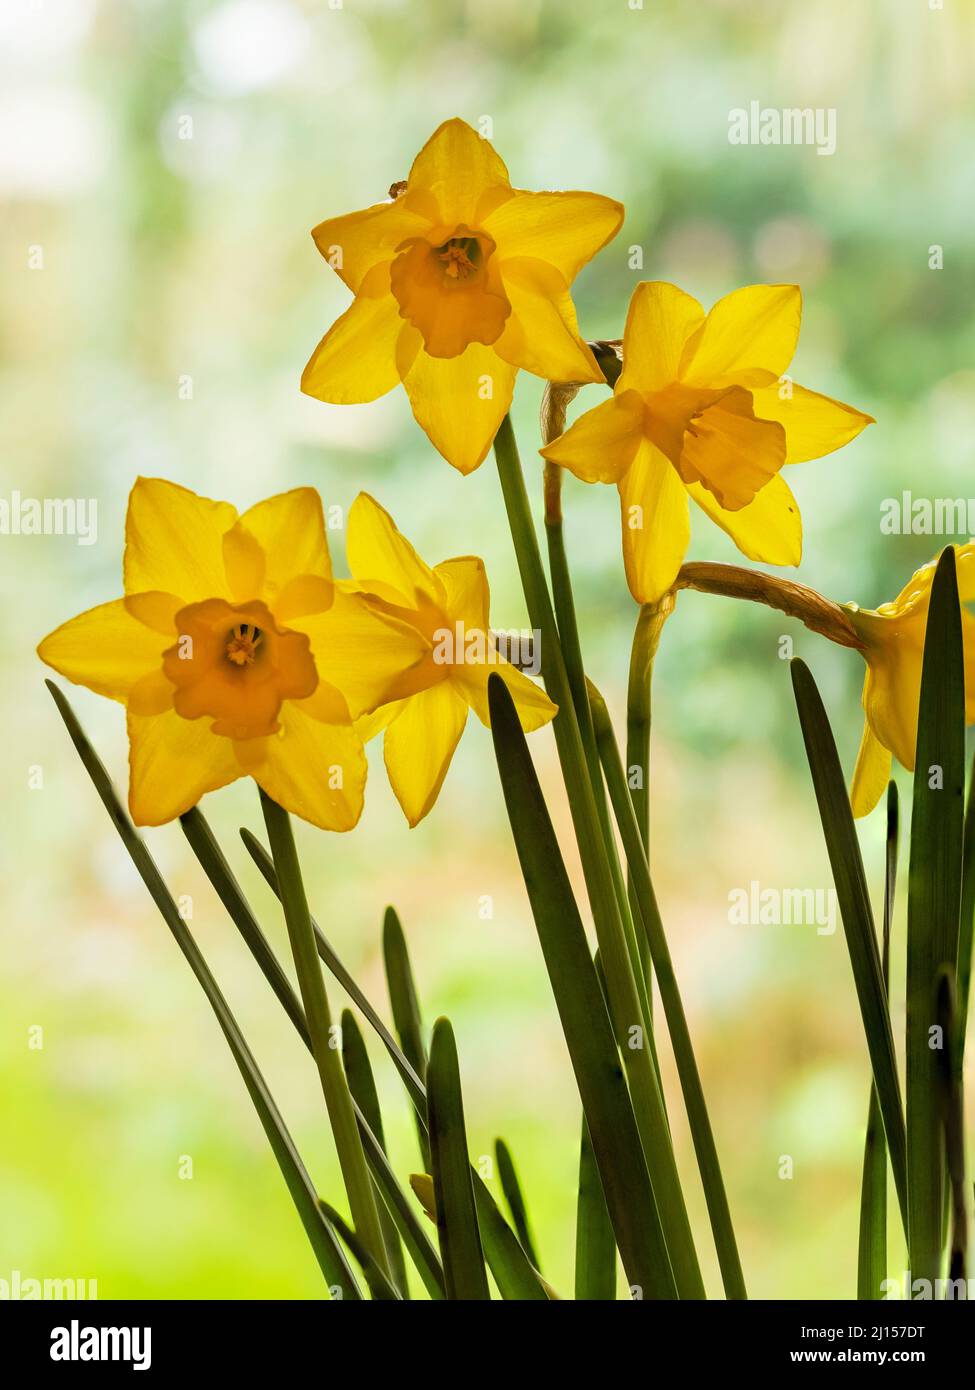 Fragrant yellow trumpets of the early flowering jonquil type daffodil, Narcissus 'Sweetness' Stock Photo